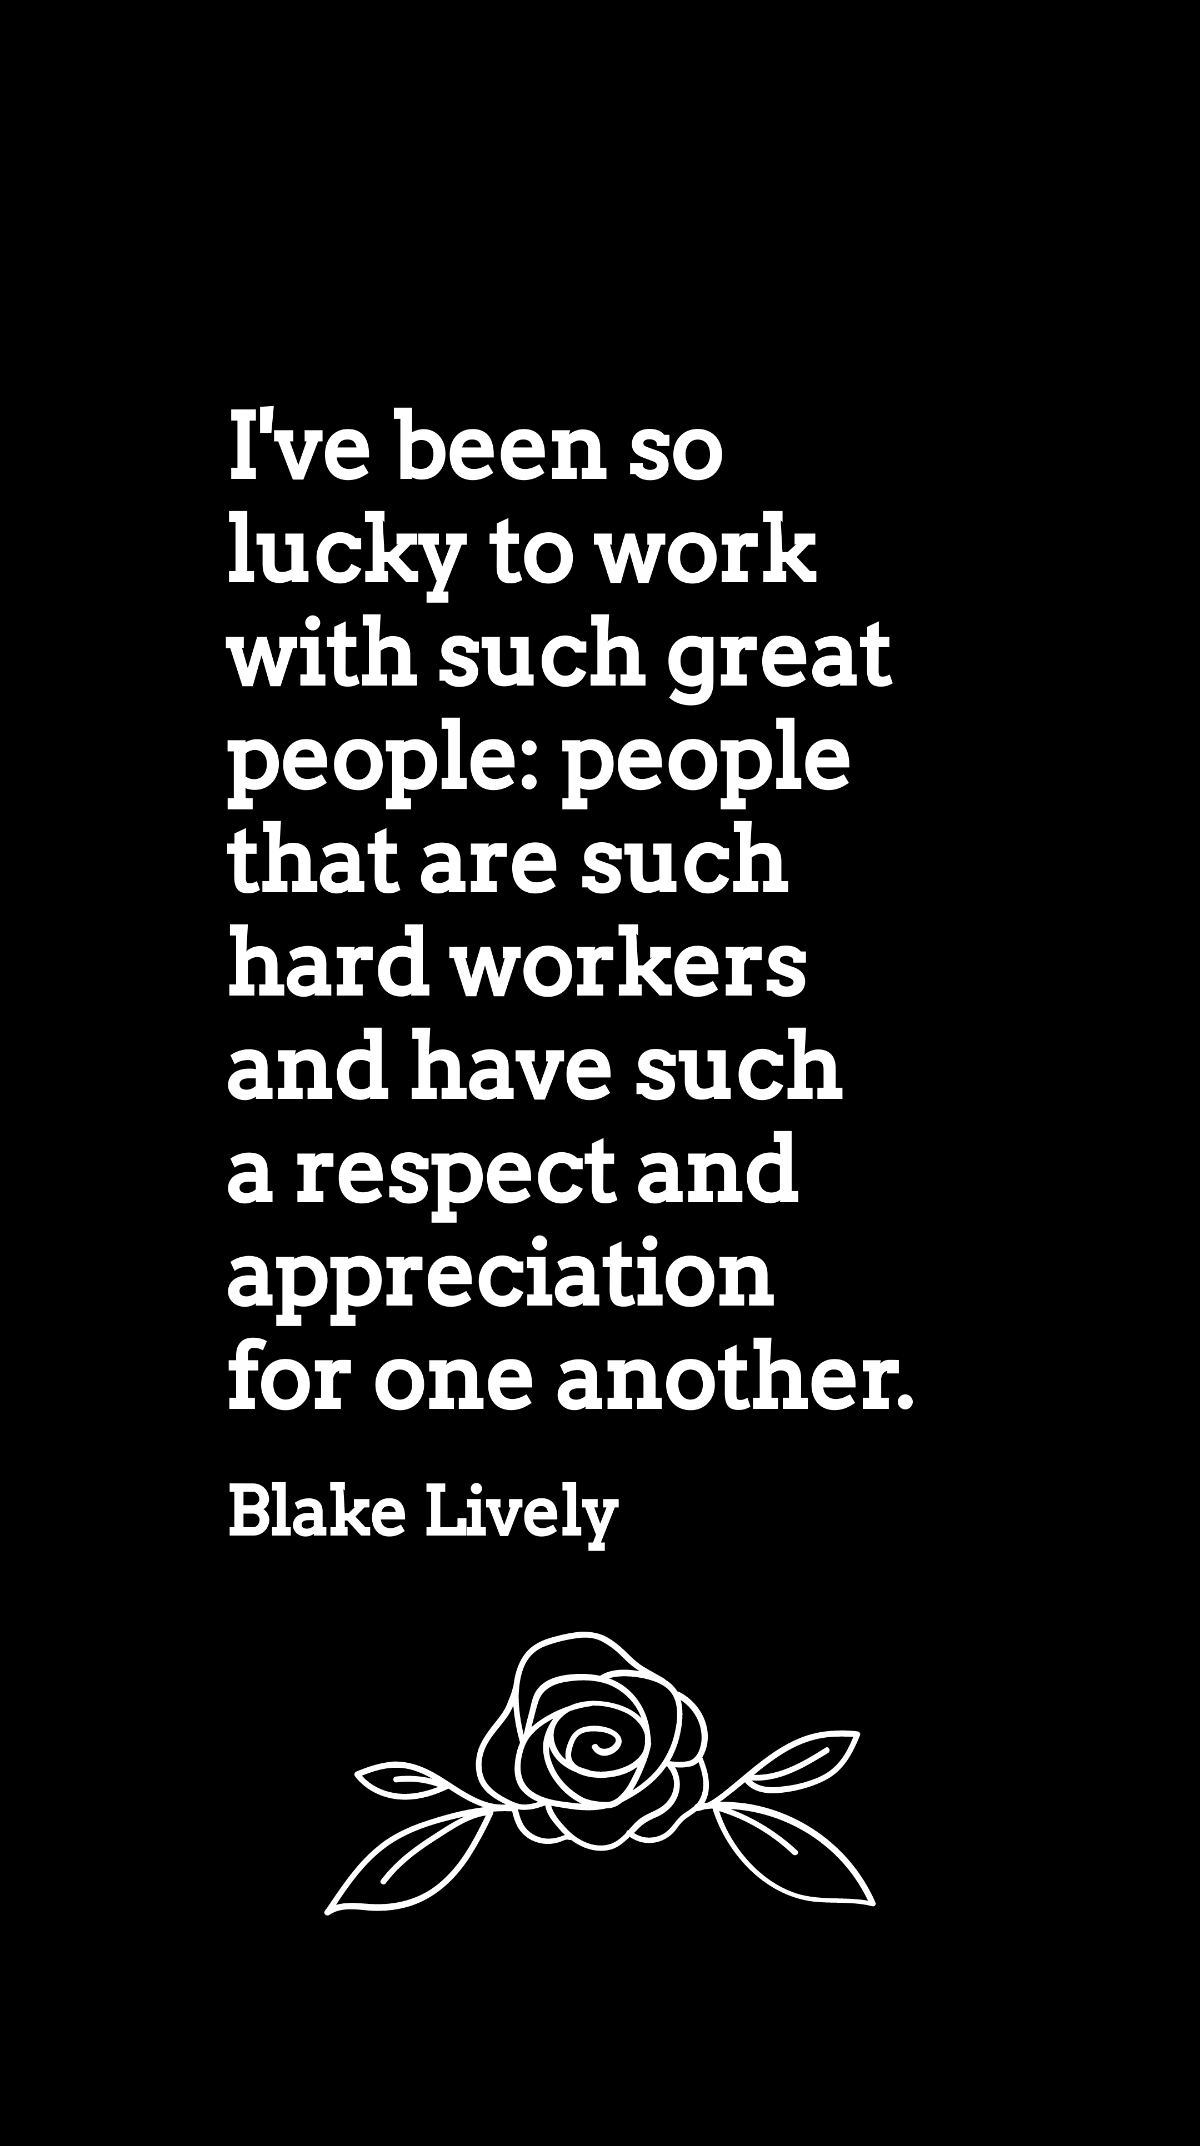 Free Blake Lively - I've been so lucky to work with such great people: people that are such hard workers and have such a respect and appreciation for one another. Template